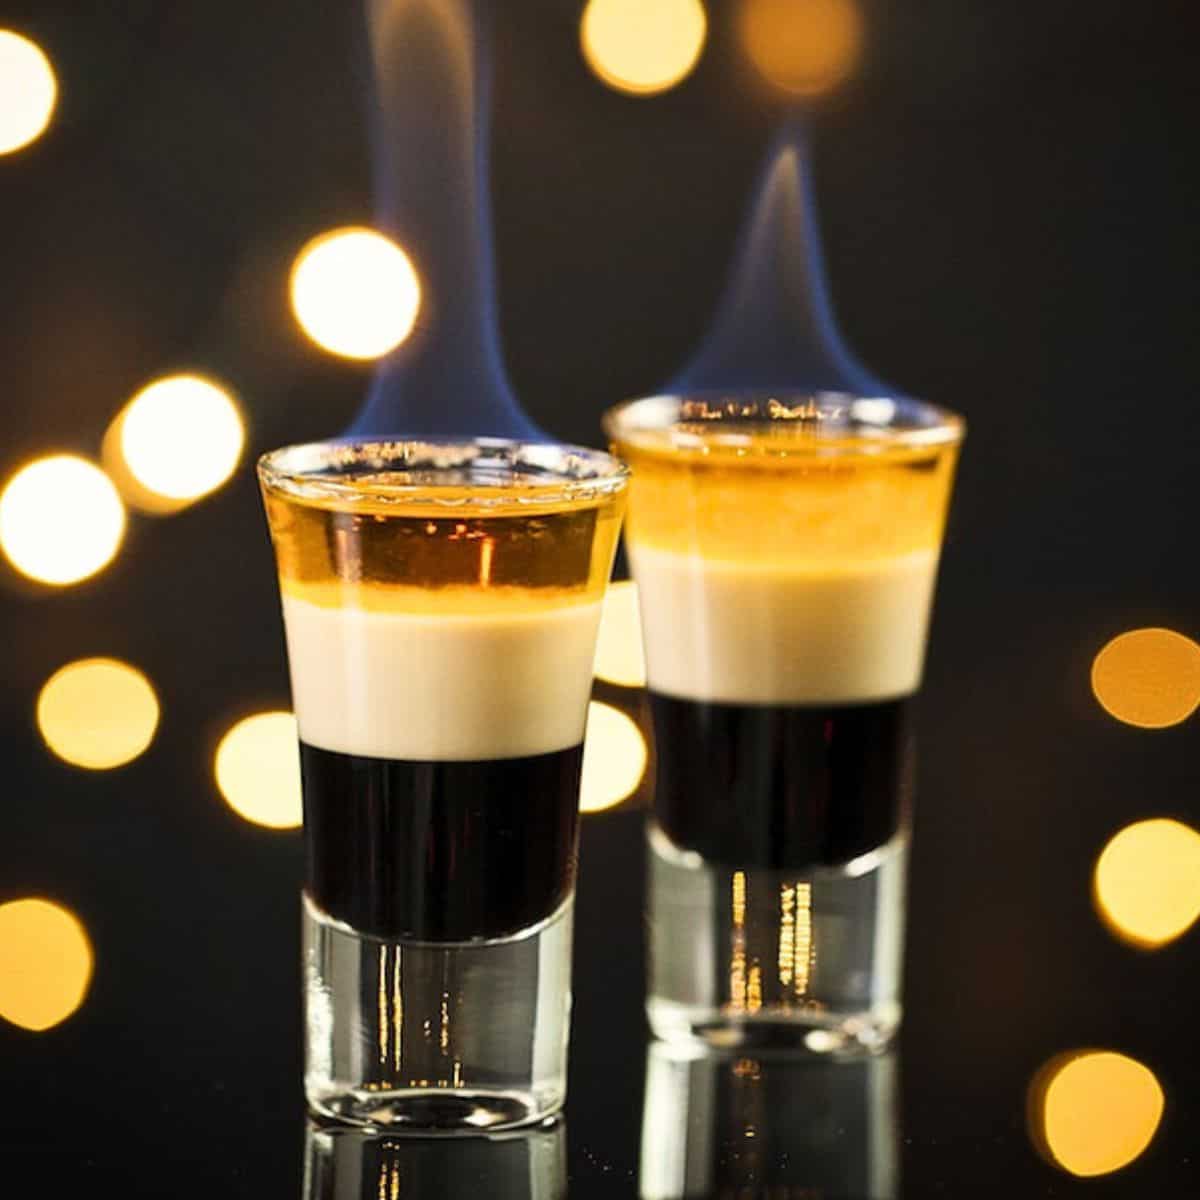 Two B-52 layered shots with flaming tops.